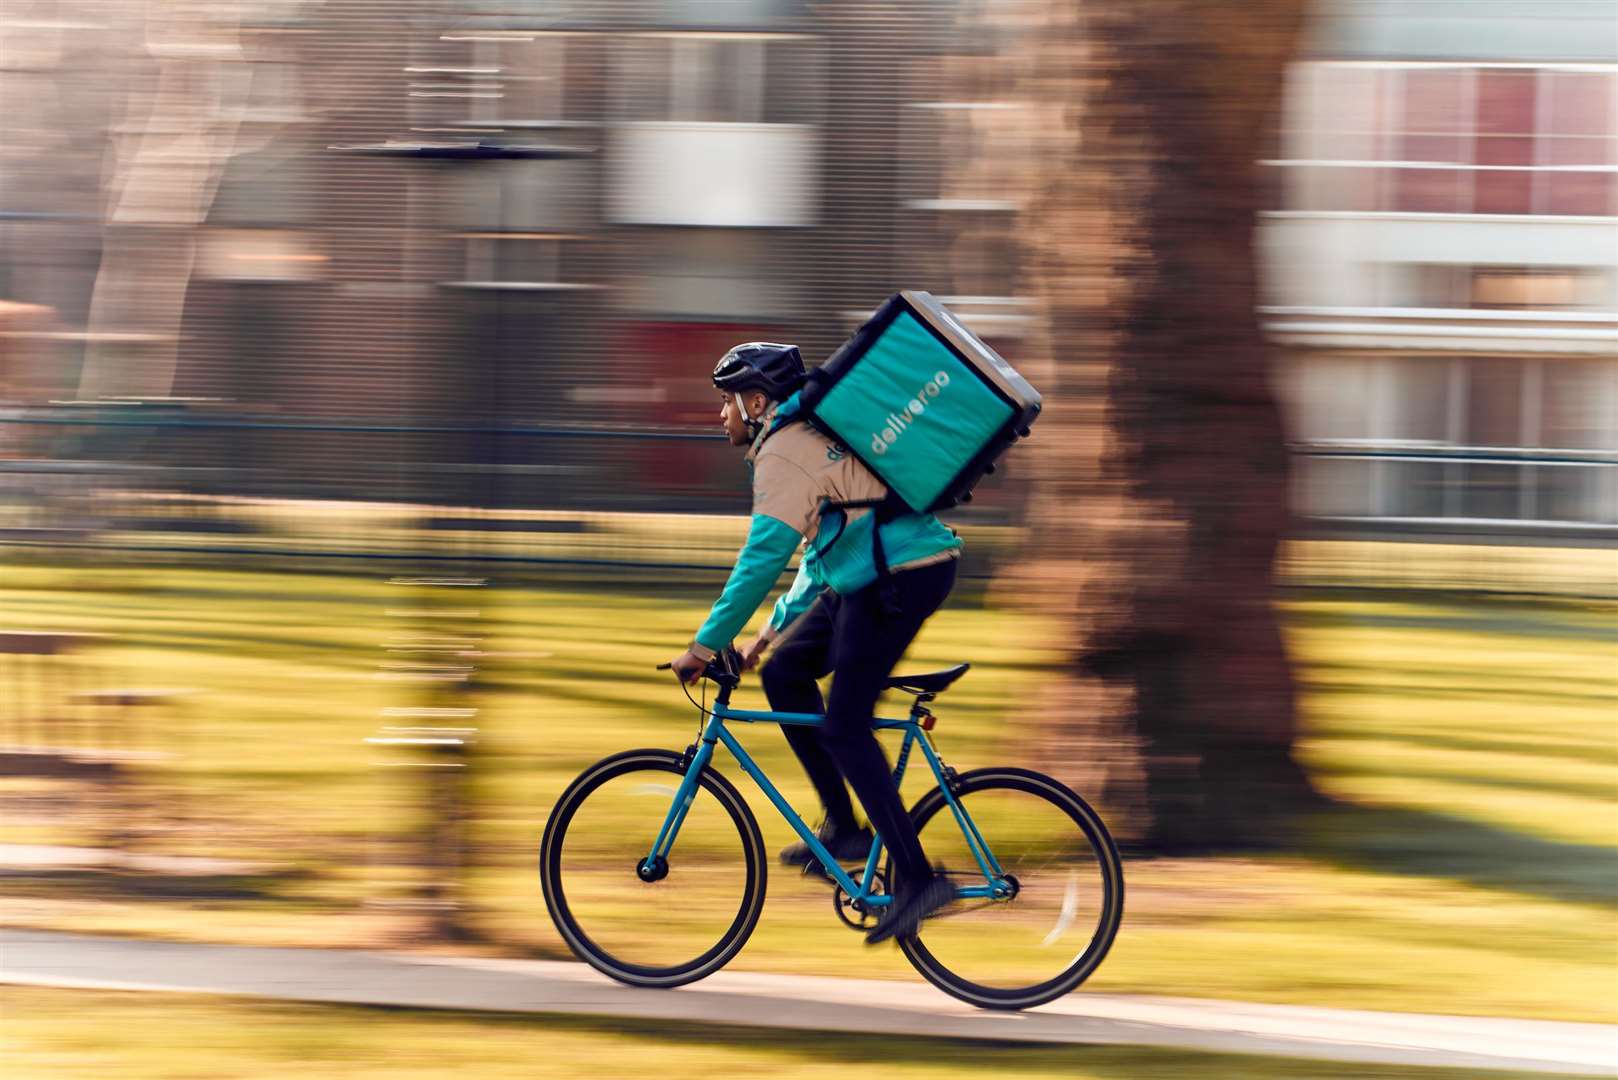 Deliveroo is coming to Folkestone